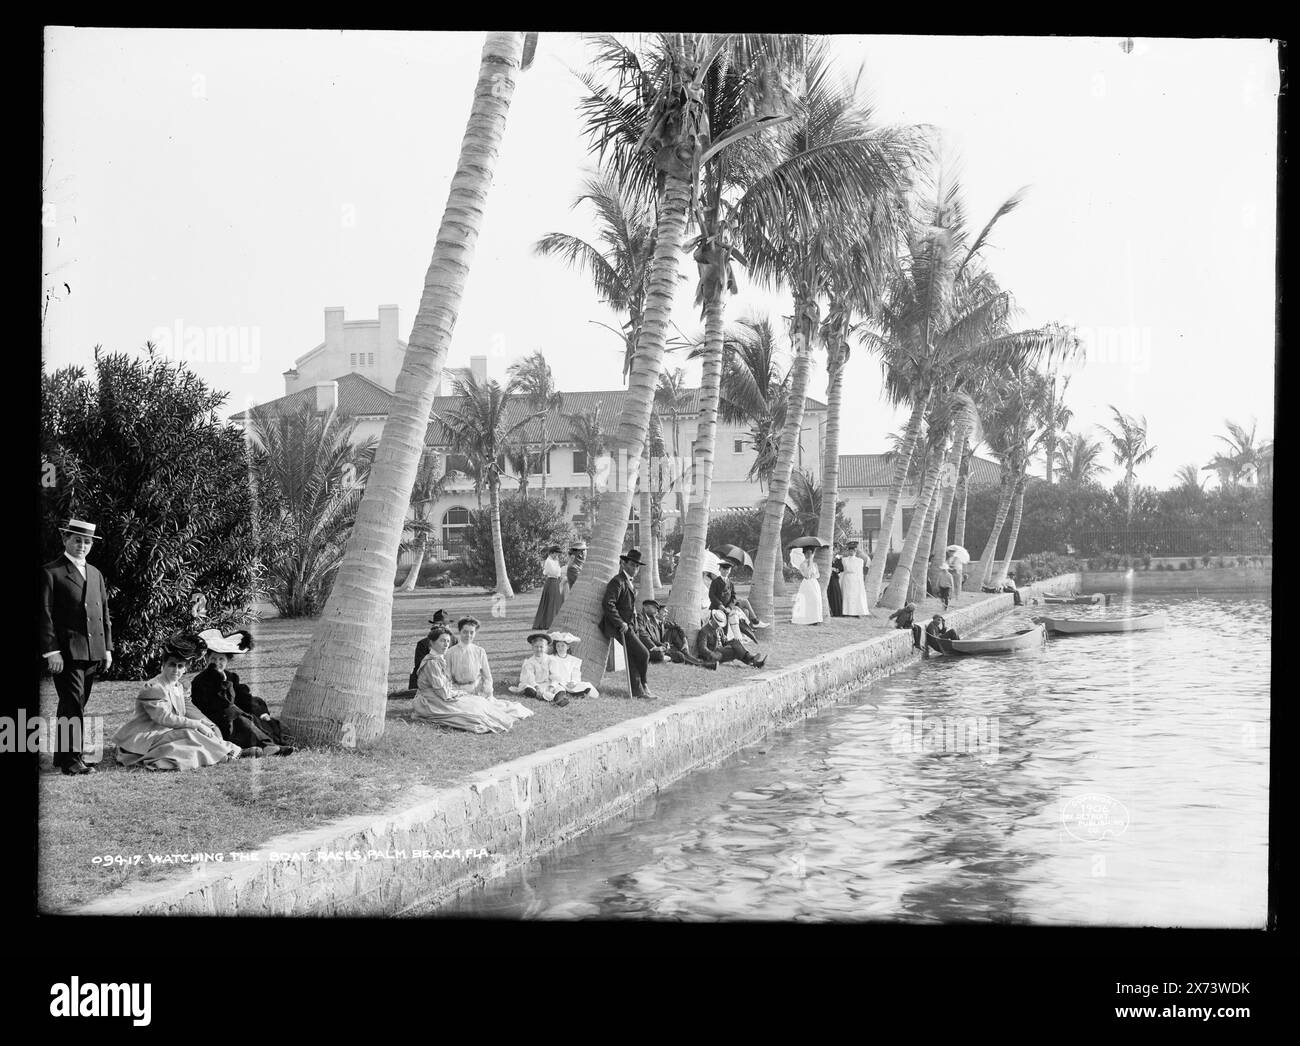 Watching the boat races, Palm Beach, Fla., Title in Detroit, Catalogue P (1906) continues: Whitehall [Flagler mansion] in background., Also available as photographic print in LOT 9081; copy negative LC-USZ62-96359 (b&w film copy neg.)., 'M-15' on negative., Detroit Publishing Co. no. 09417., Gift; State Historical Society of Colorado; 1949,  Dwellings. , Crowds. , Waterfronts. , United States, Florida, Palm Beach. Stock Photo